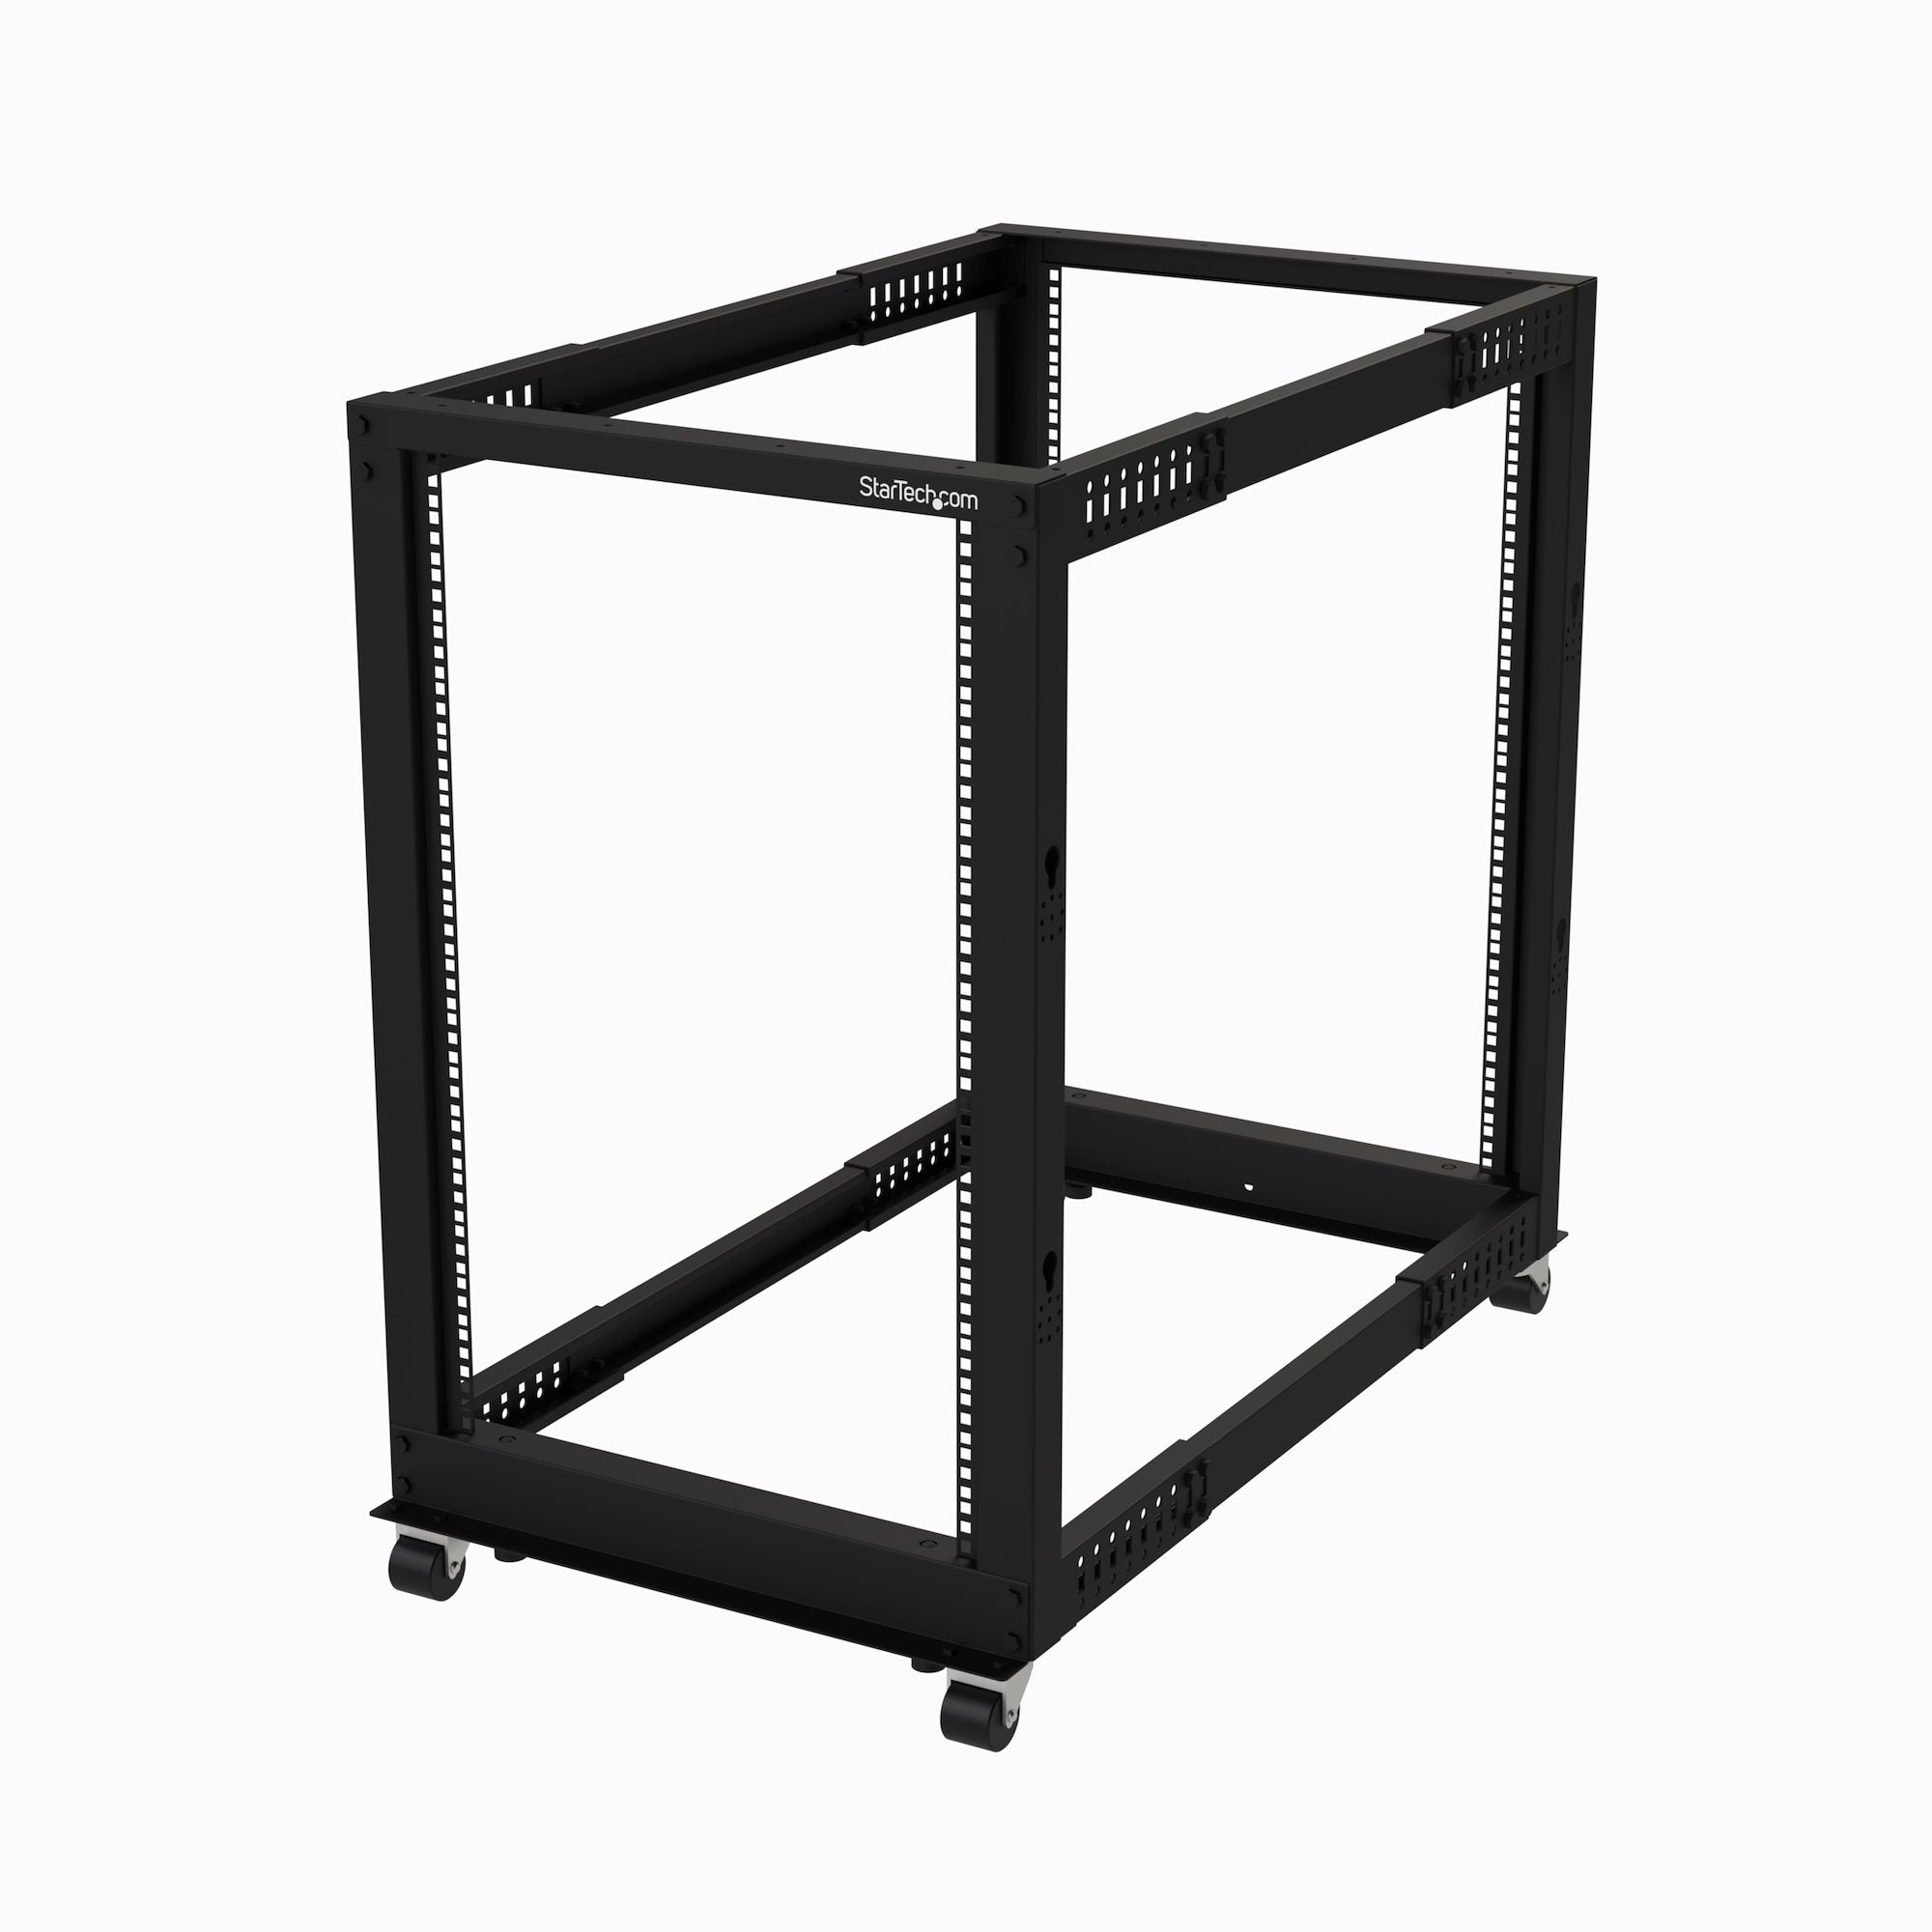 StarTech.com 4-Post 18U Mobile Open Frame Server Rack, Four Post 19" Network Rack with Wheels, Rolling Rack with Adjustable Depth for Computer/AV/Data/IT Equipment - Casters, Leveling Feet or Floor Mounting